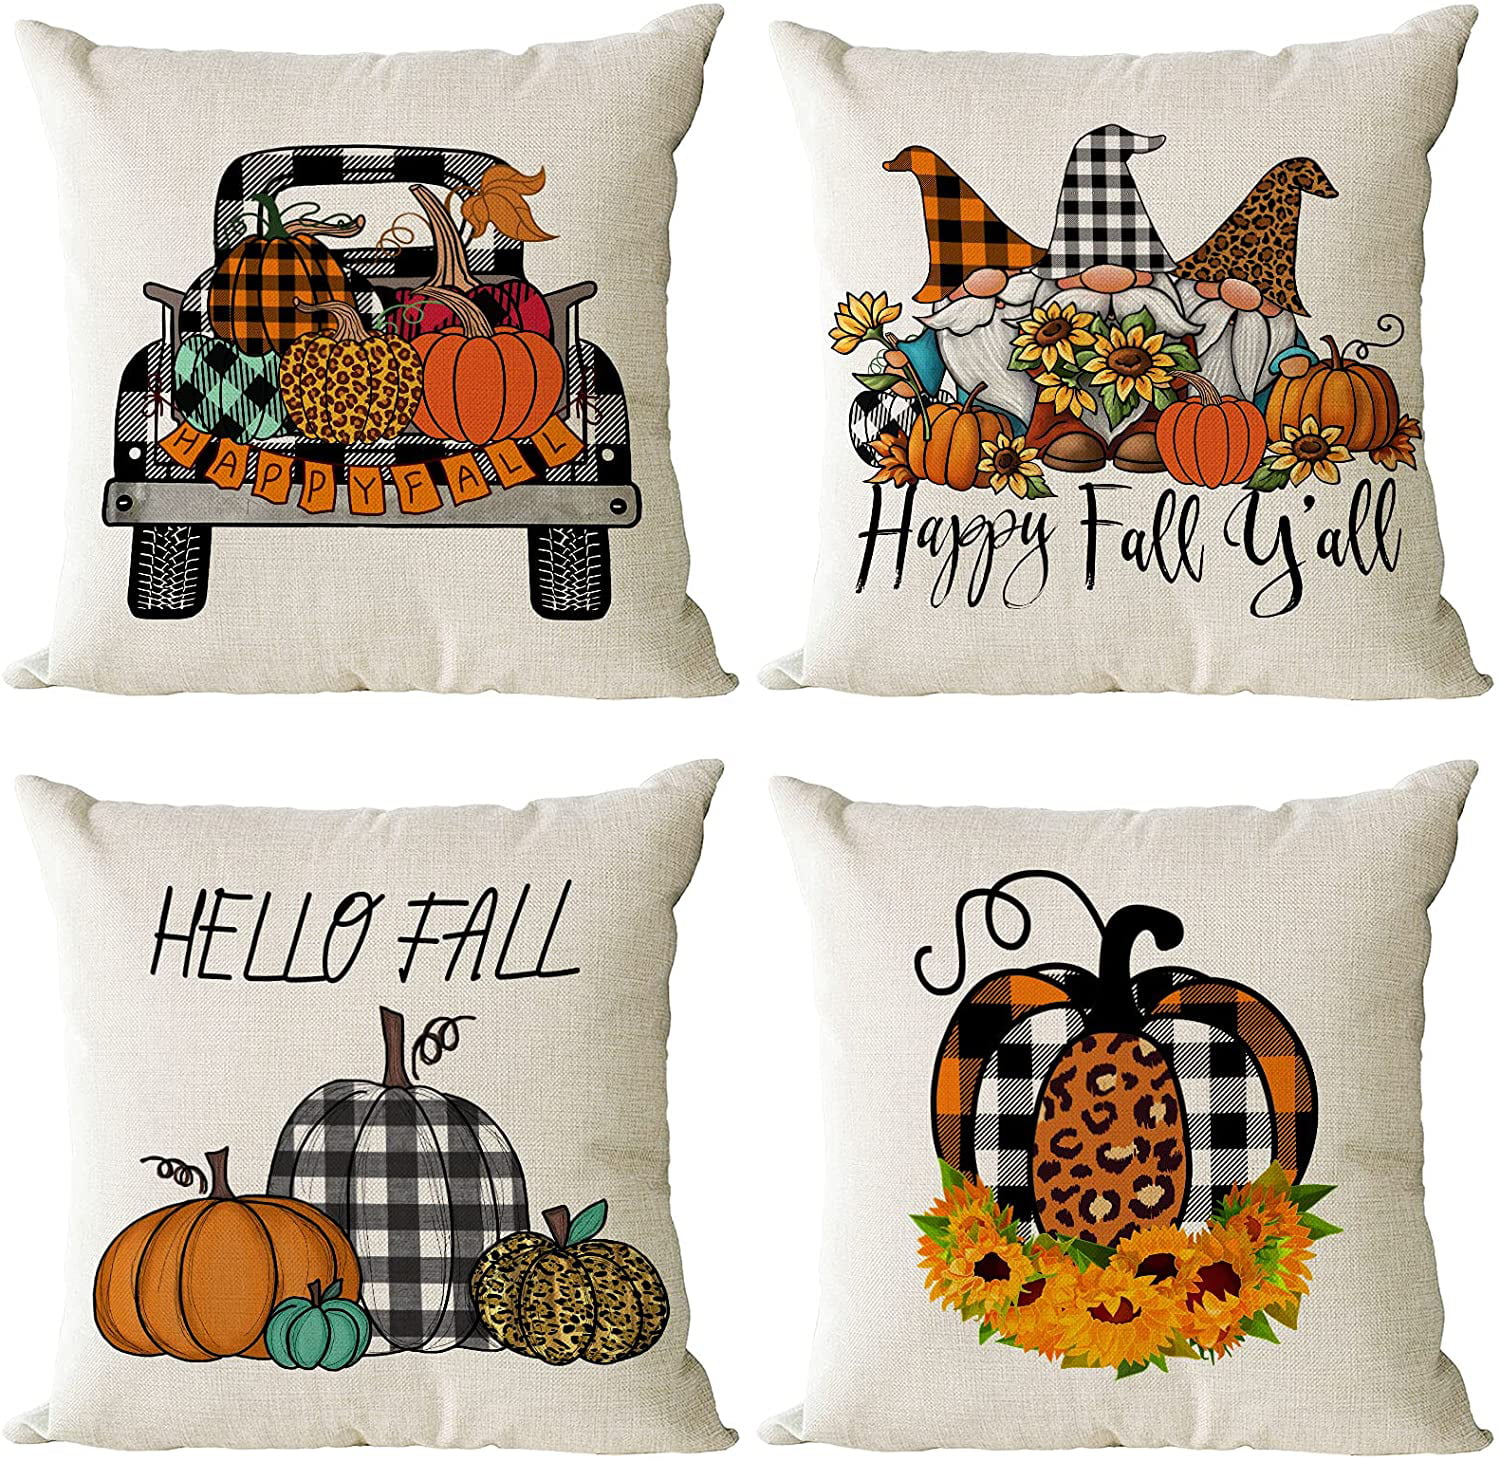 Fall Pillow Covers 12x20,Linen Autumn Farmhosue Leopard Buffalo Plaid Pumpkin Welcome Couch Fall Throw Pillow Covers for Sofa,Bedroom Outdoor Cute Cusion Case Harvest Home Decoration